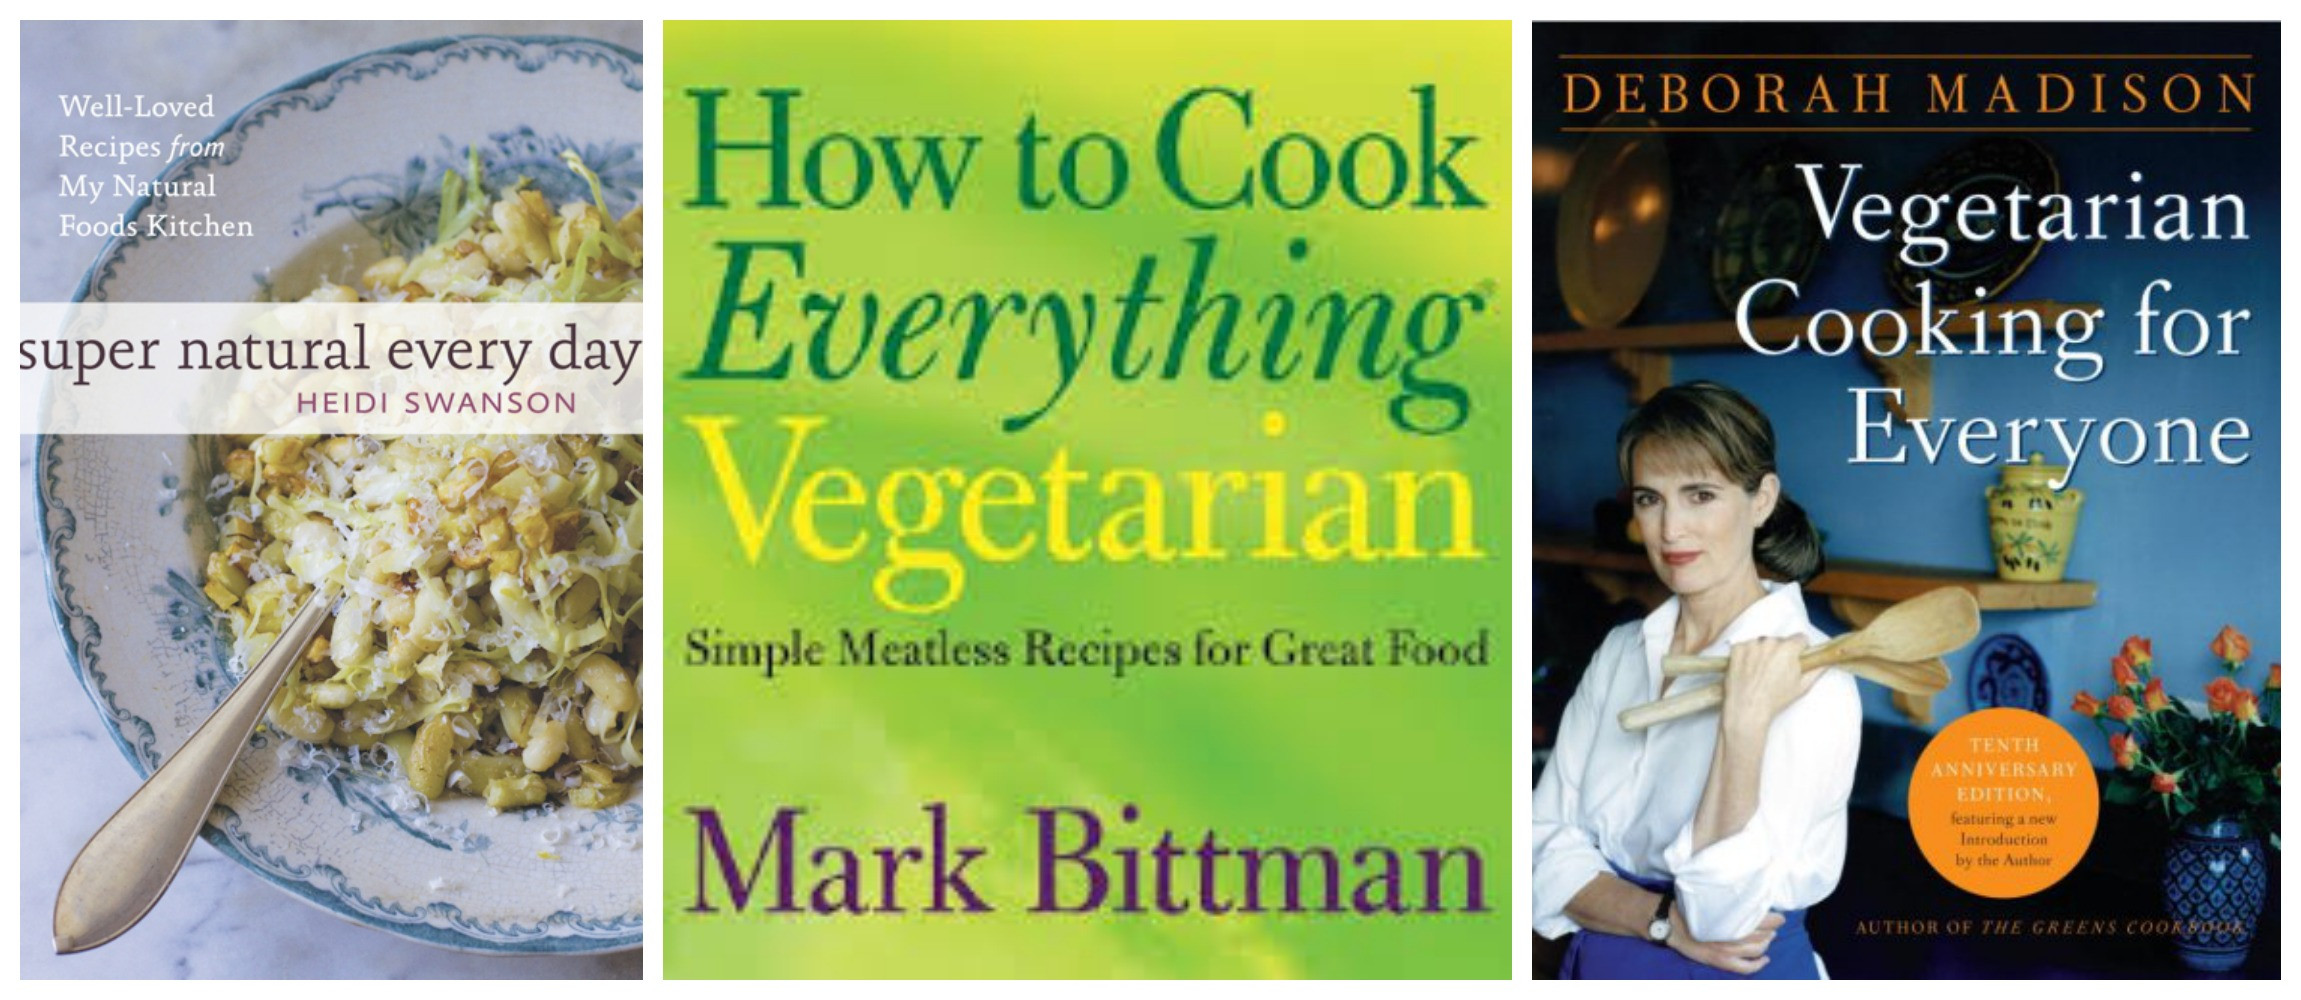 Mark Bittman Vegetarian Recipes
 A Ve arian at the Table Dinner A Love Story